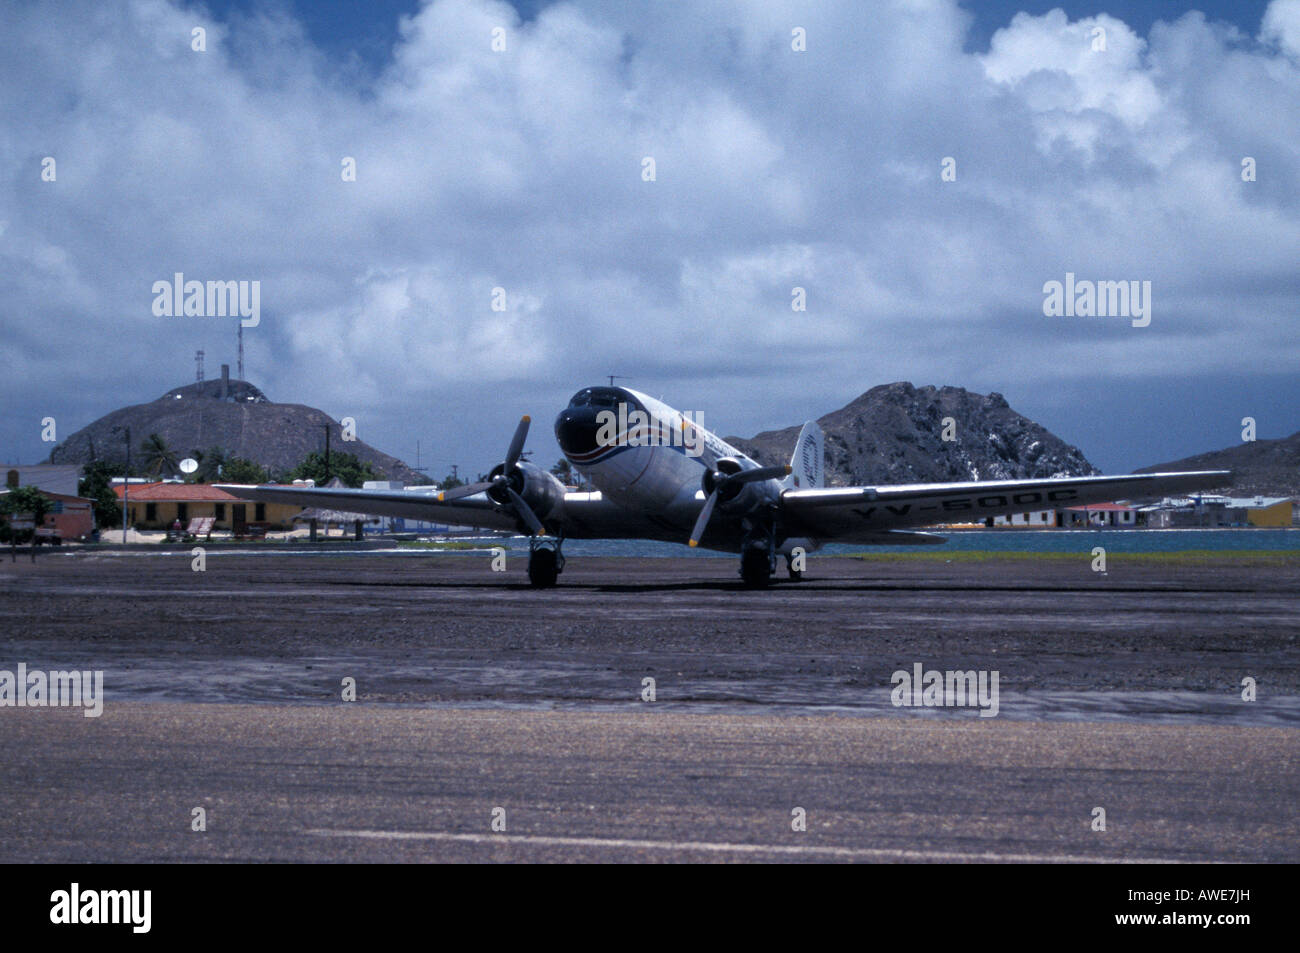 Refurbished Douglas DC-3 aircraft on the ground at the airport on Gran Roque island, Archipielago Los Roques, Venezuela, South America Stock Photo